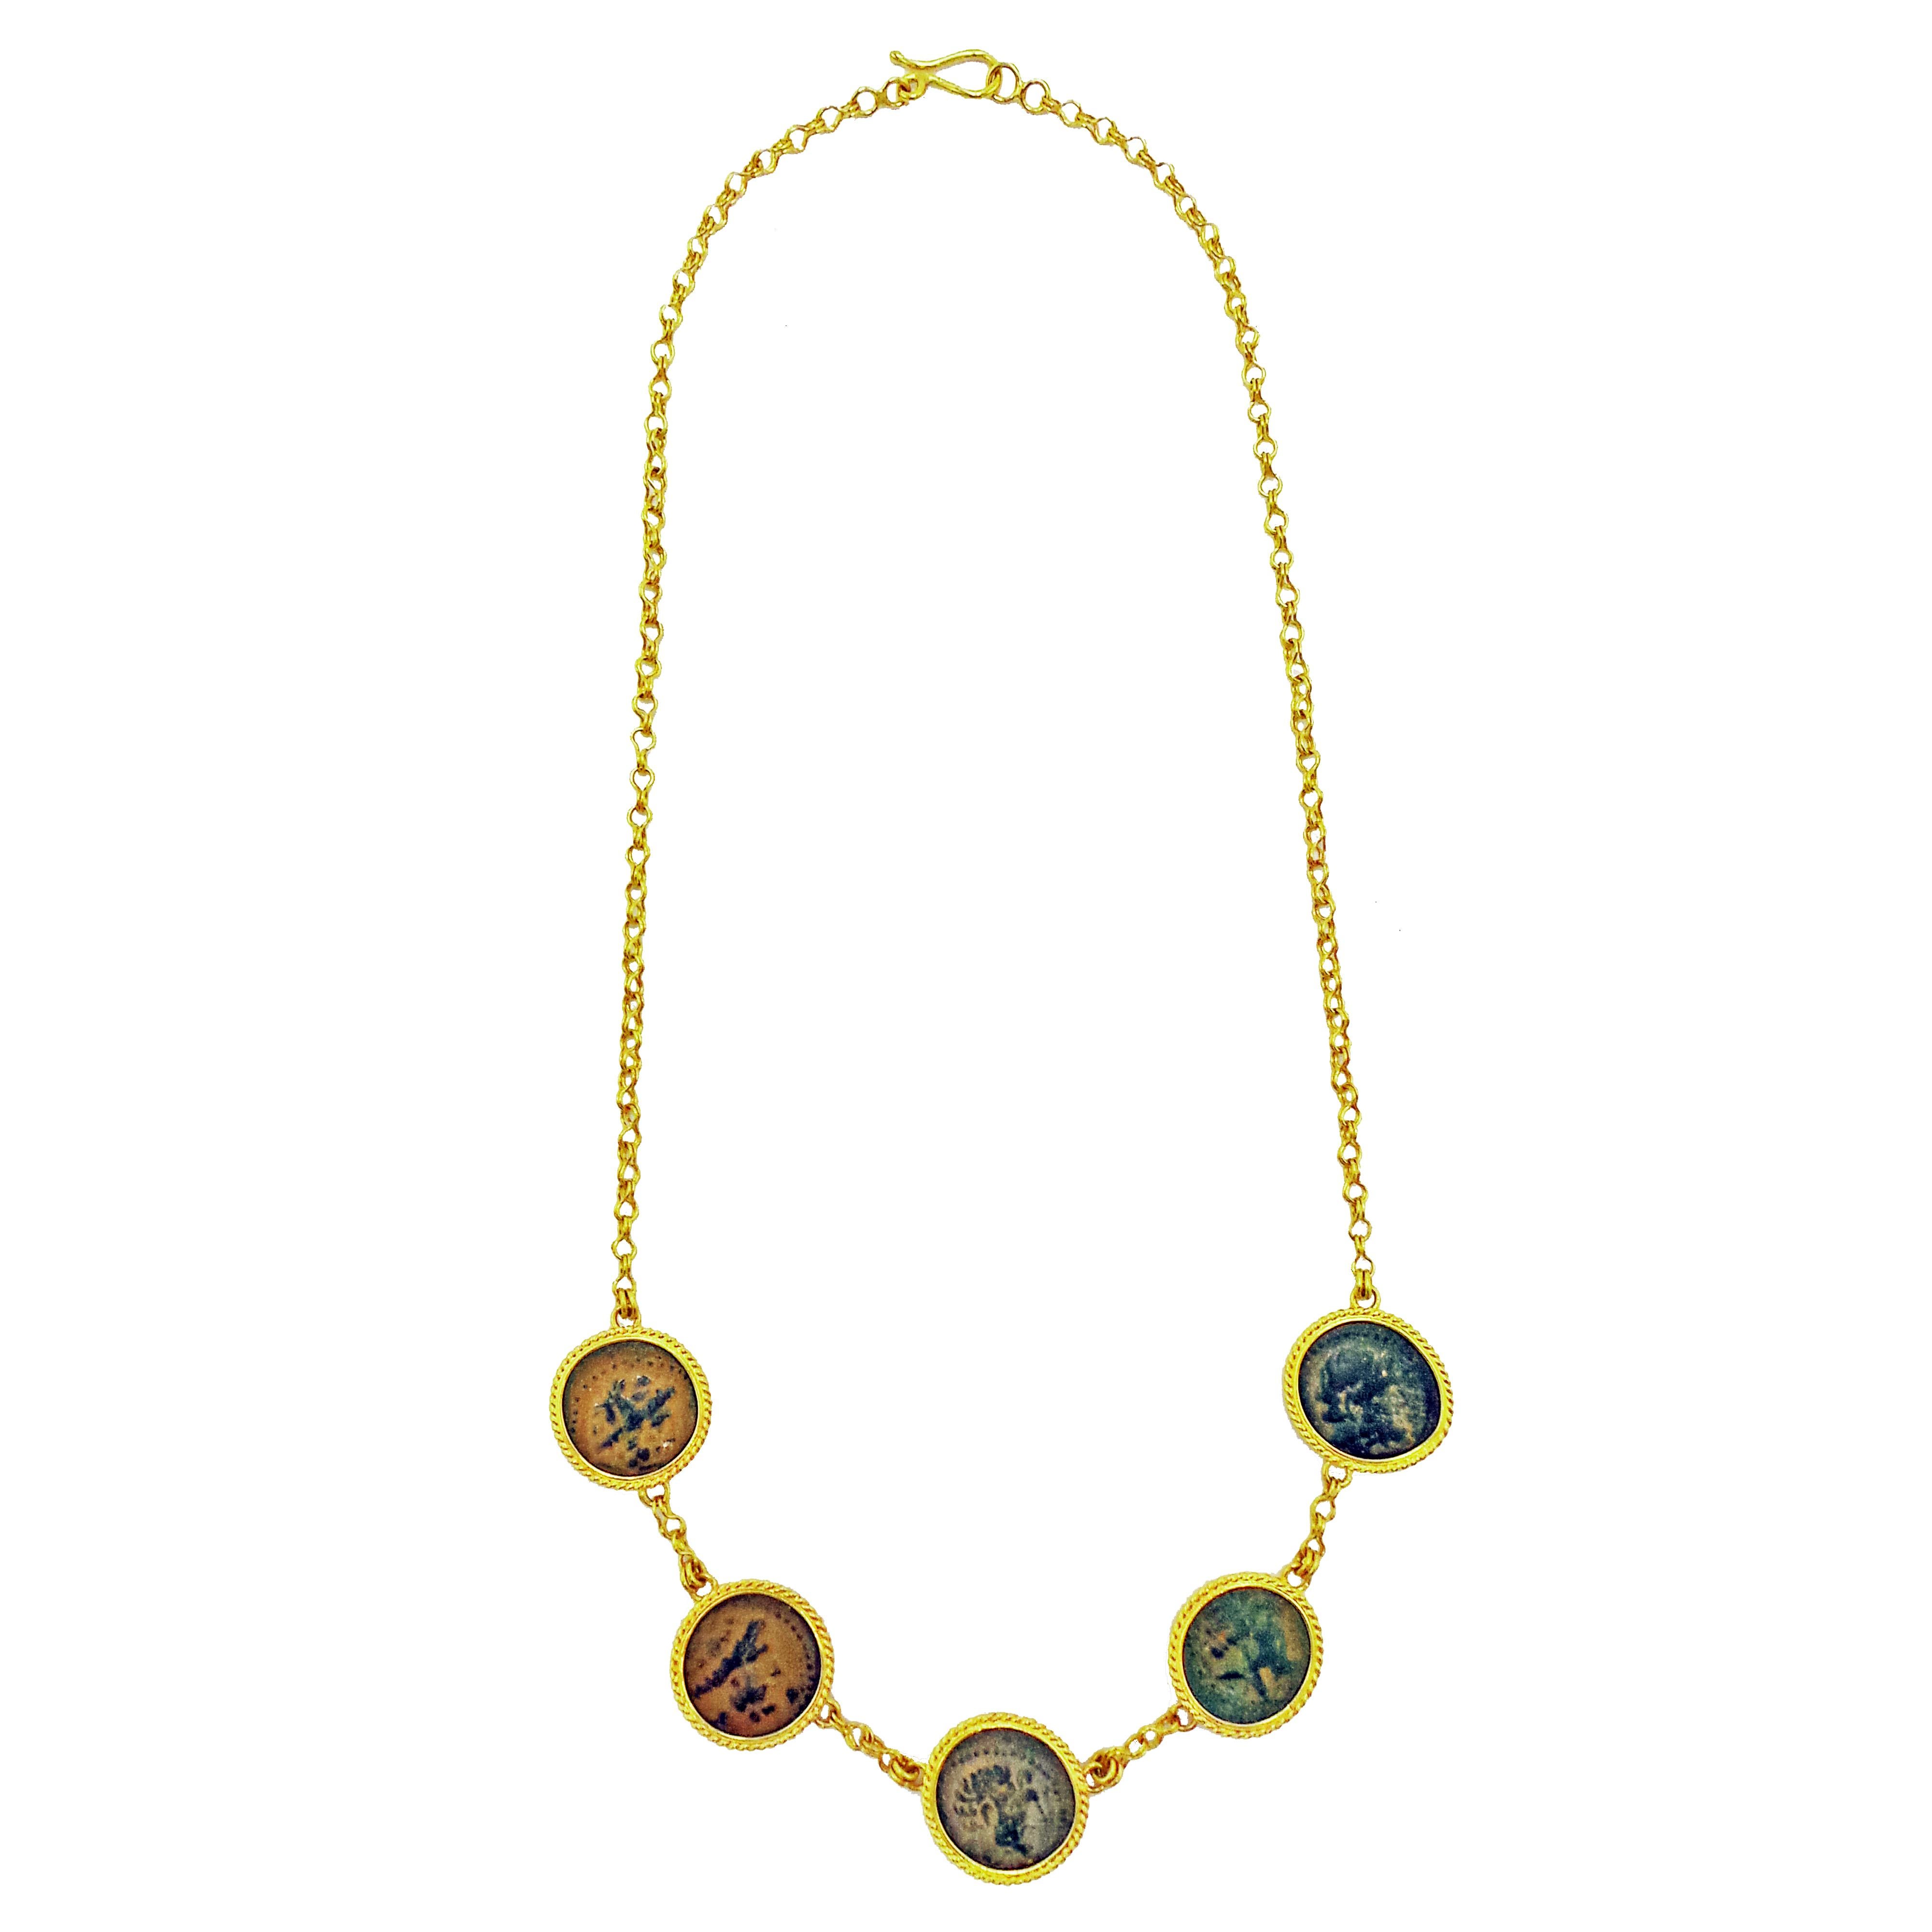 Ancient Necklaces - 325 For Sale on 1stDibs | antiquities gold 